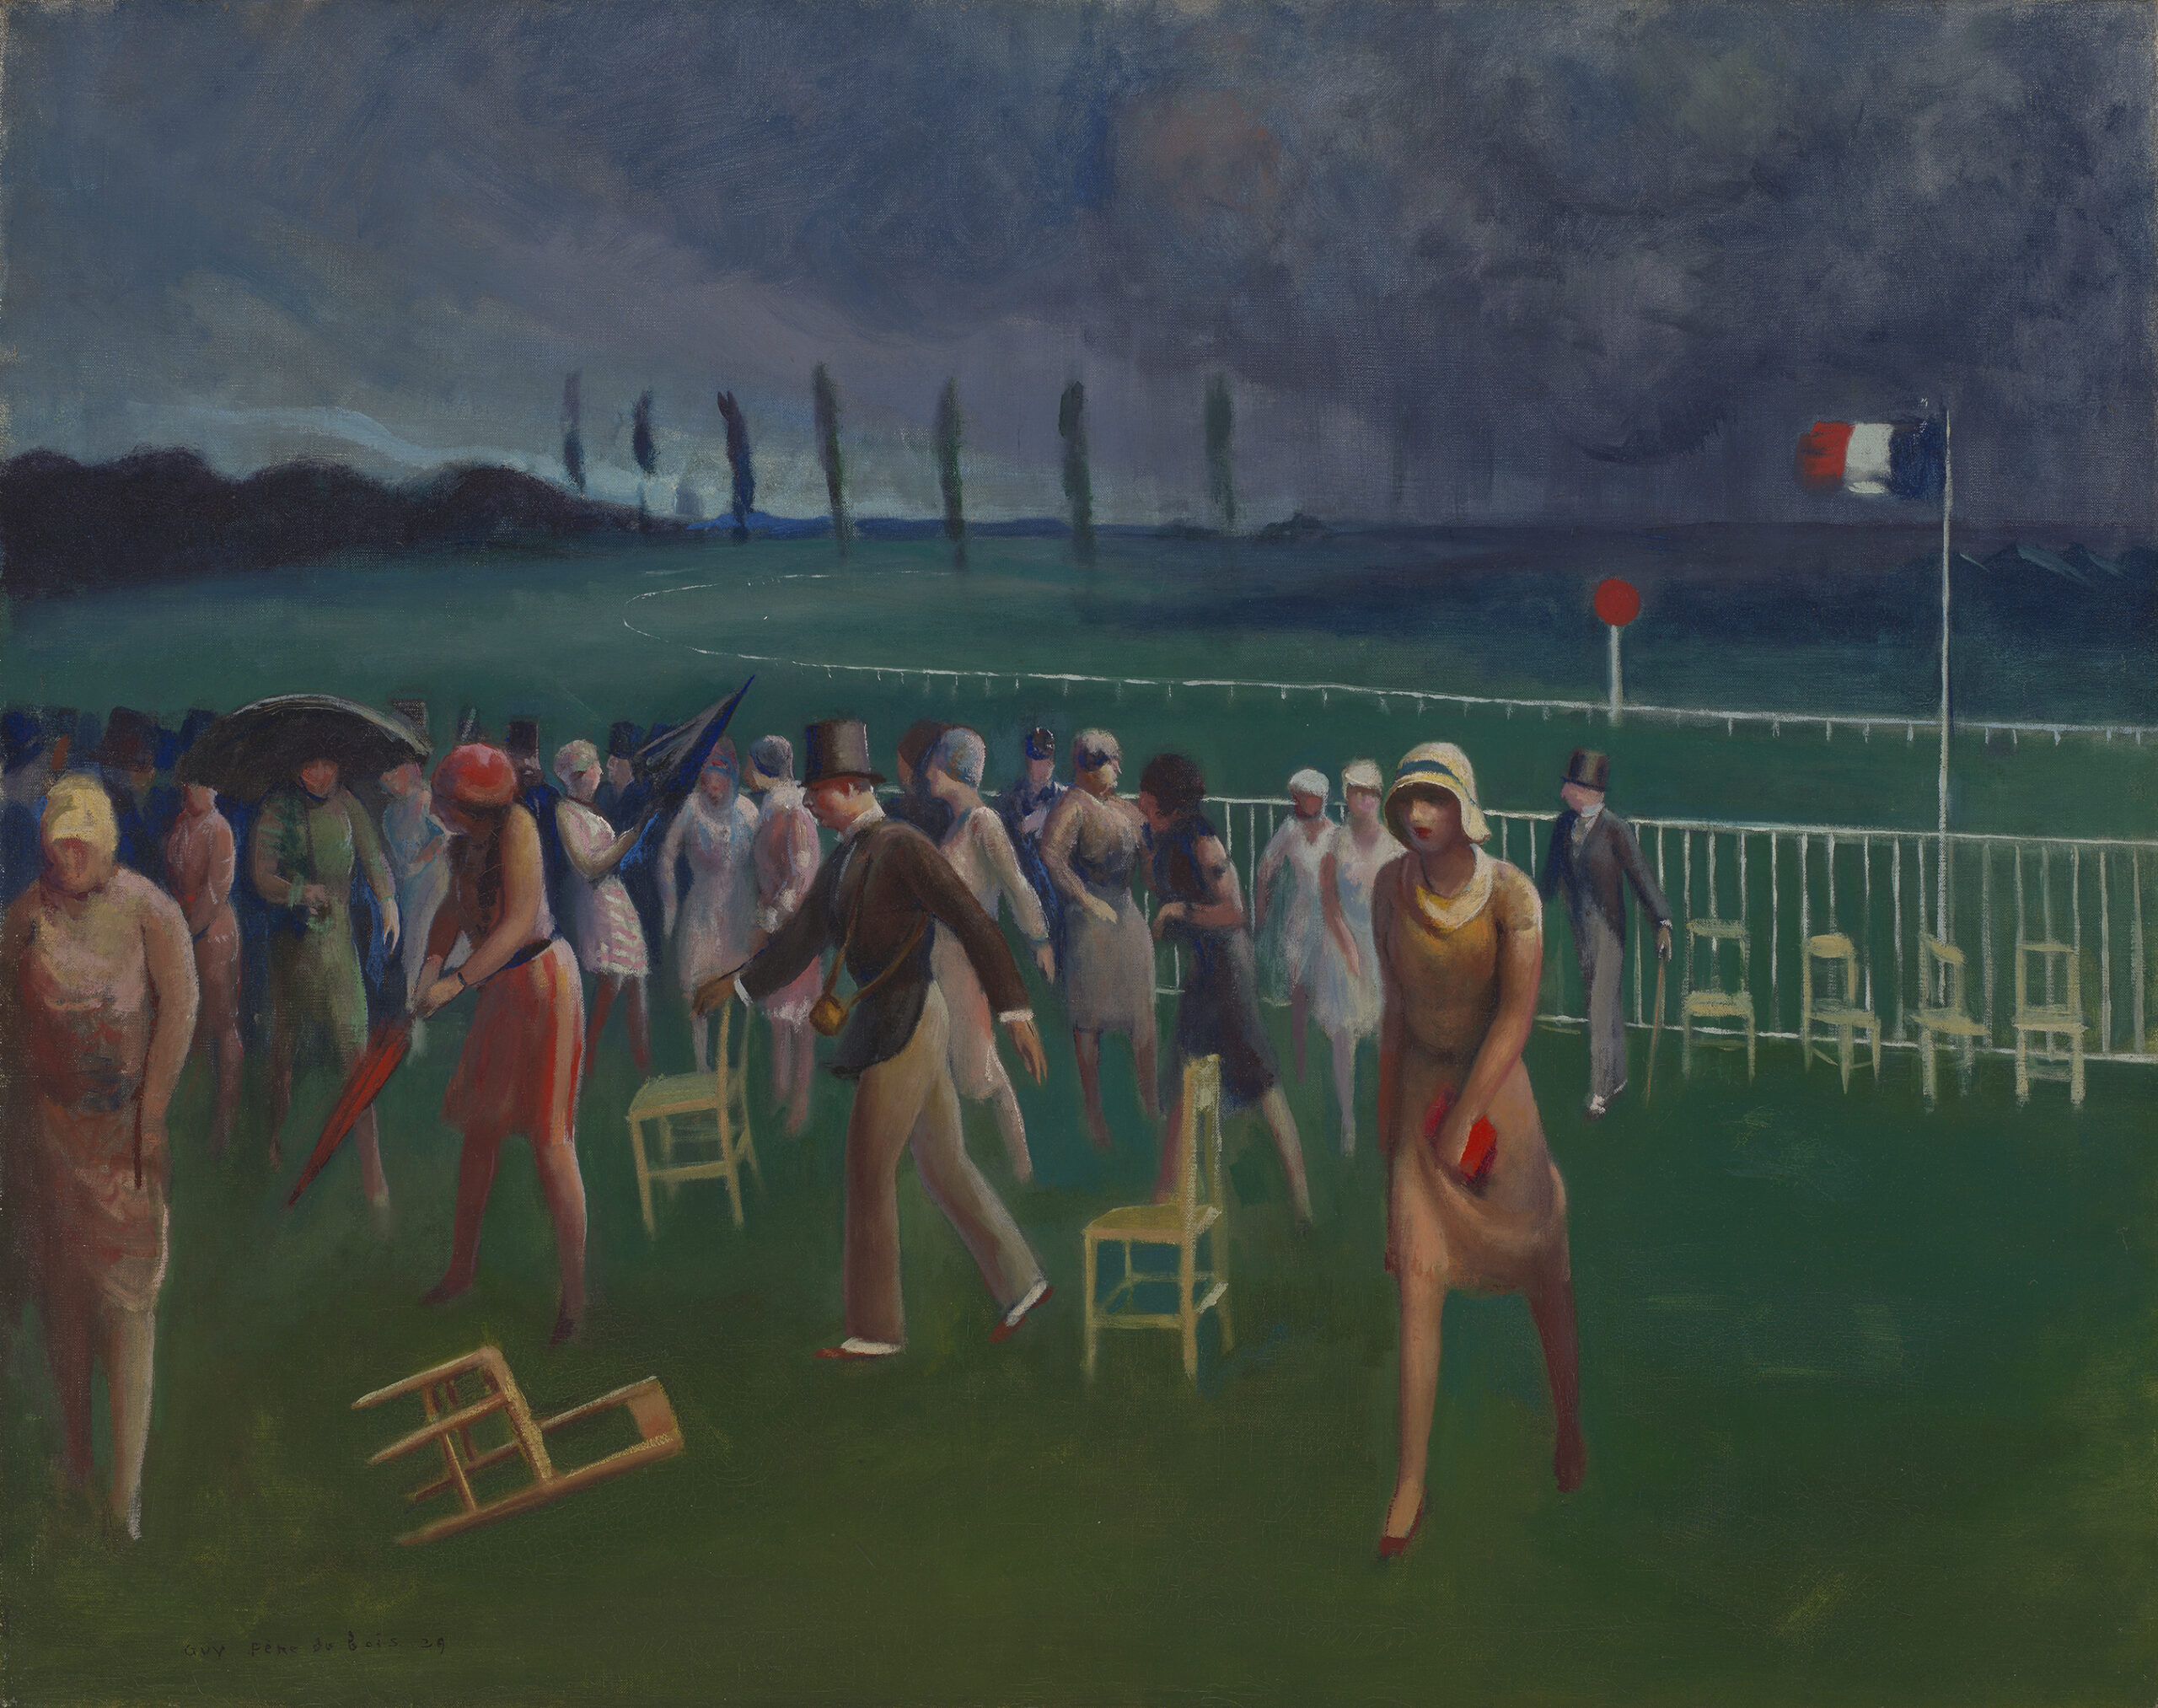 Approaching Storm, Racetrack, 1929, Guy Pène du Bois (American, 1884–1958), oil on canvas. Virginia Museum of Fine Arts, J. Harwood and Louise B. Cochrane Fund for American Art, 2022.15